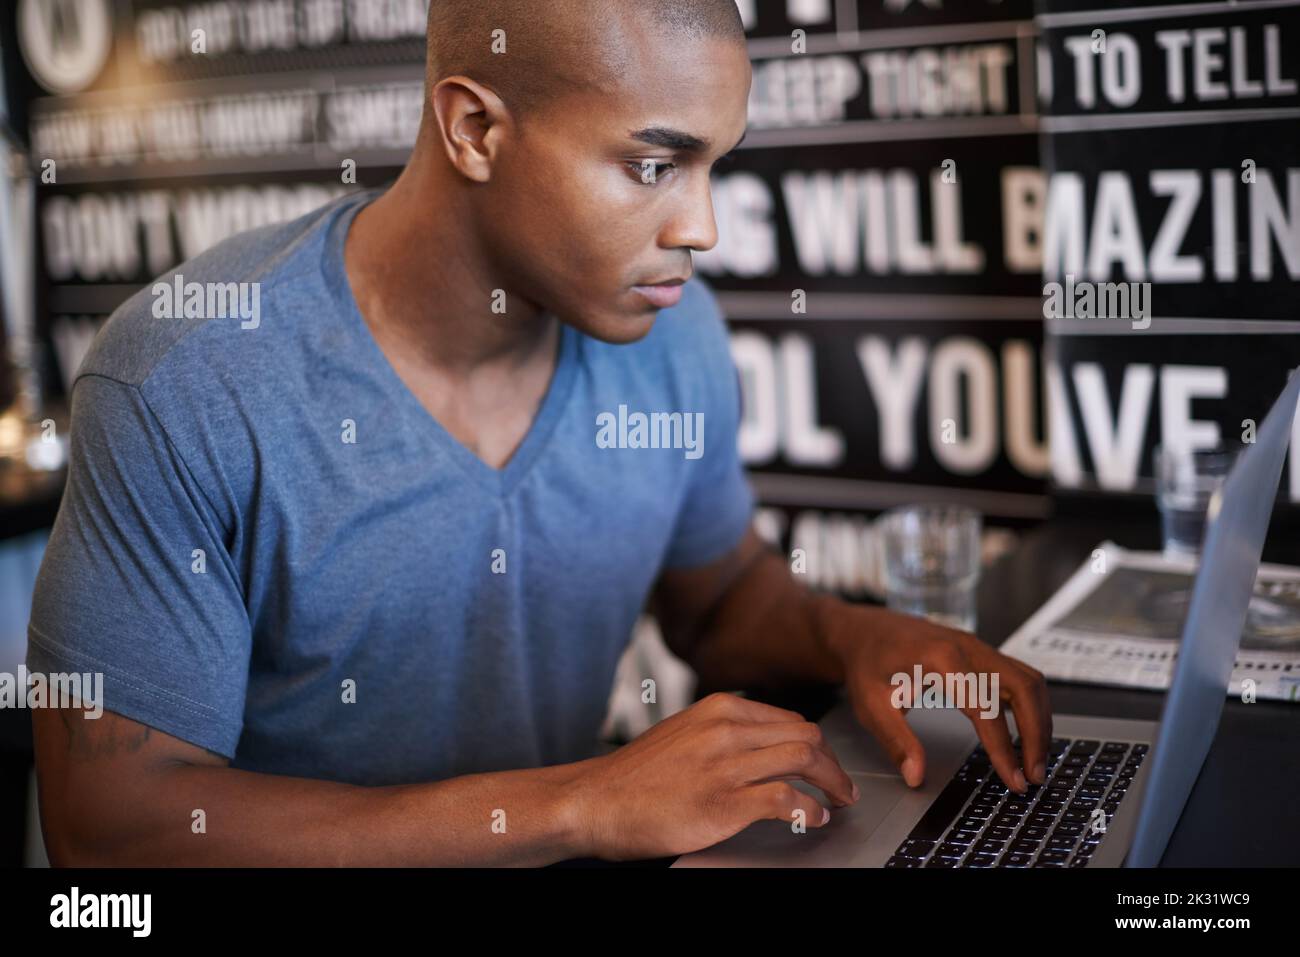 Head down, production up. a handsome young man using his laptop in a coffee shop. Stock Photo